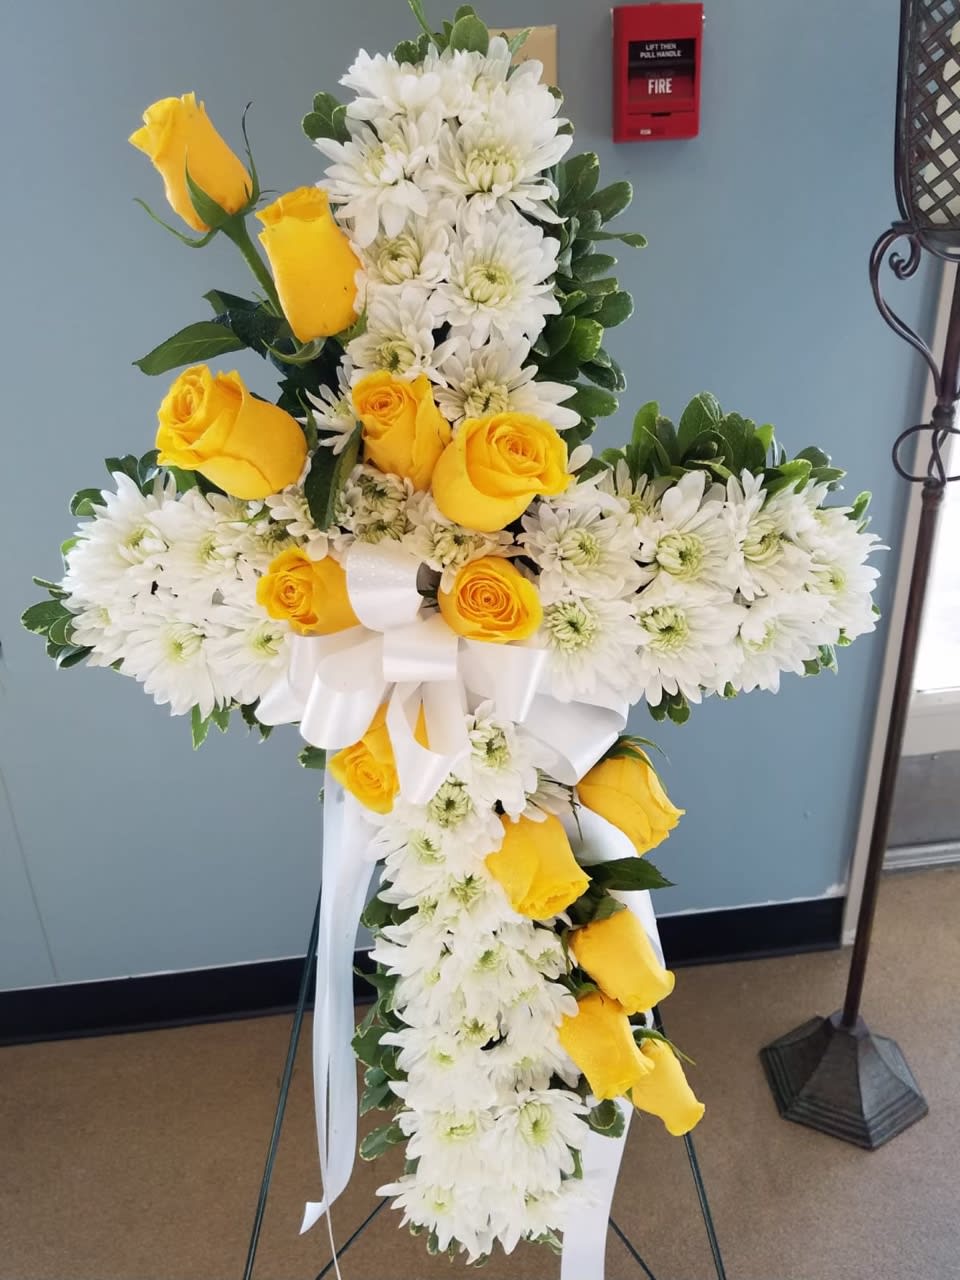 With with yellow roses standing cross